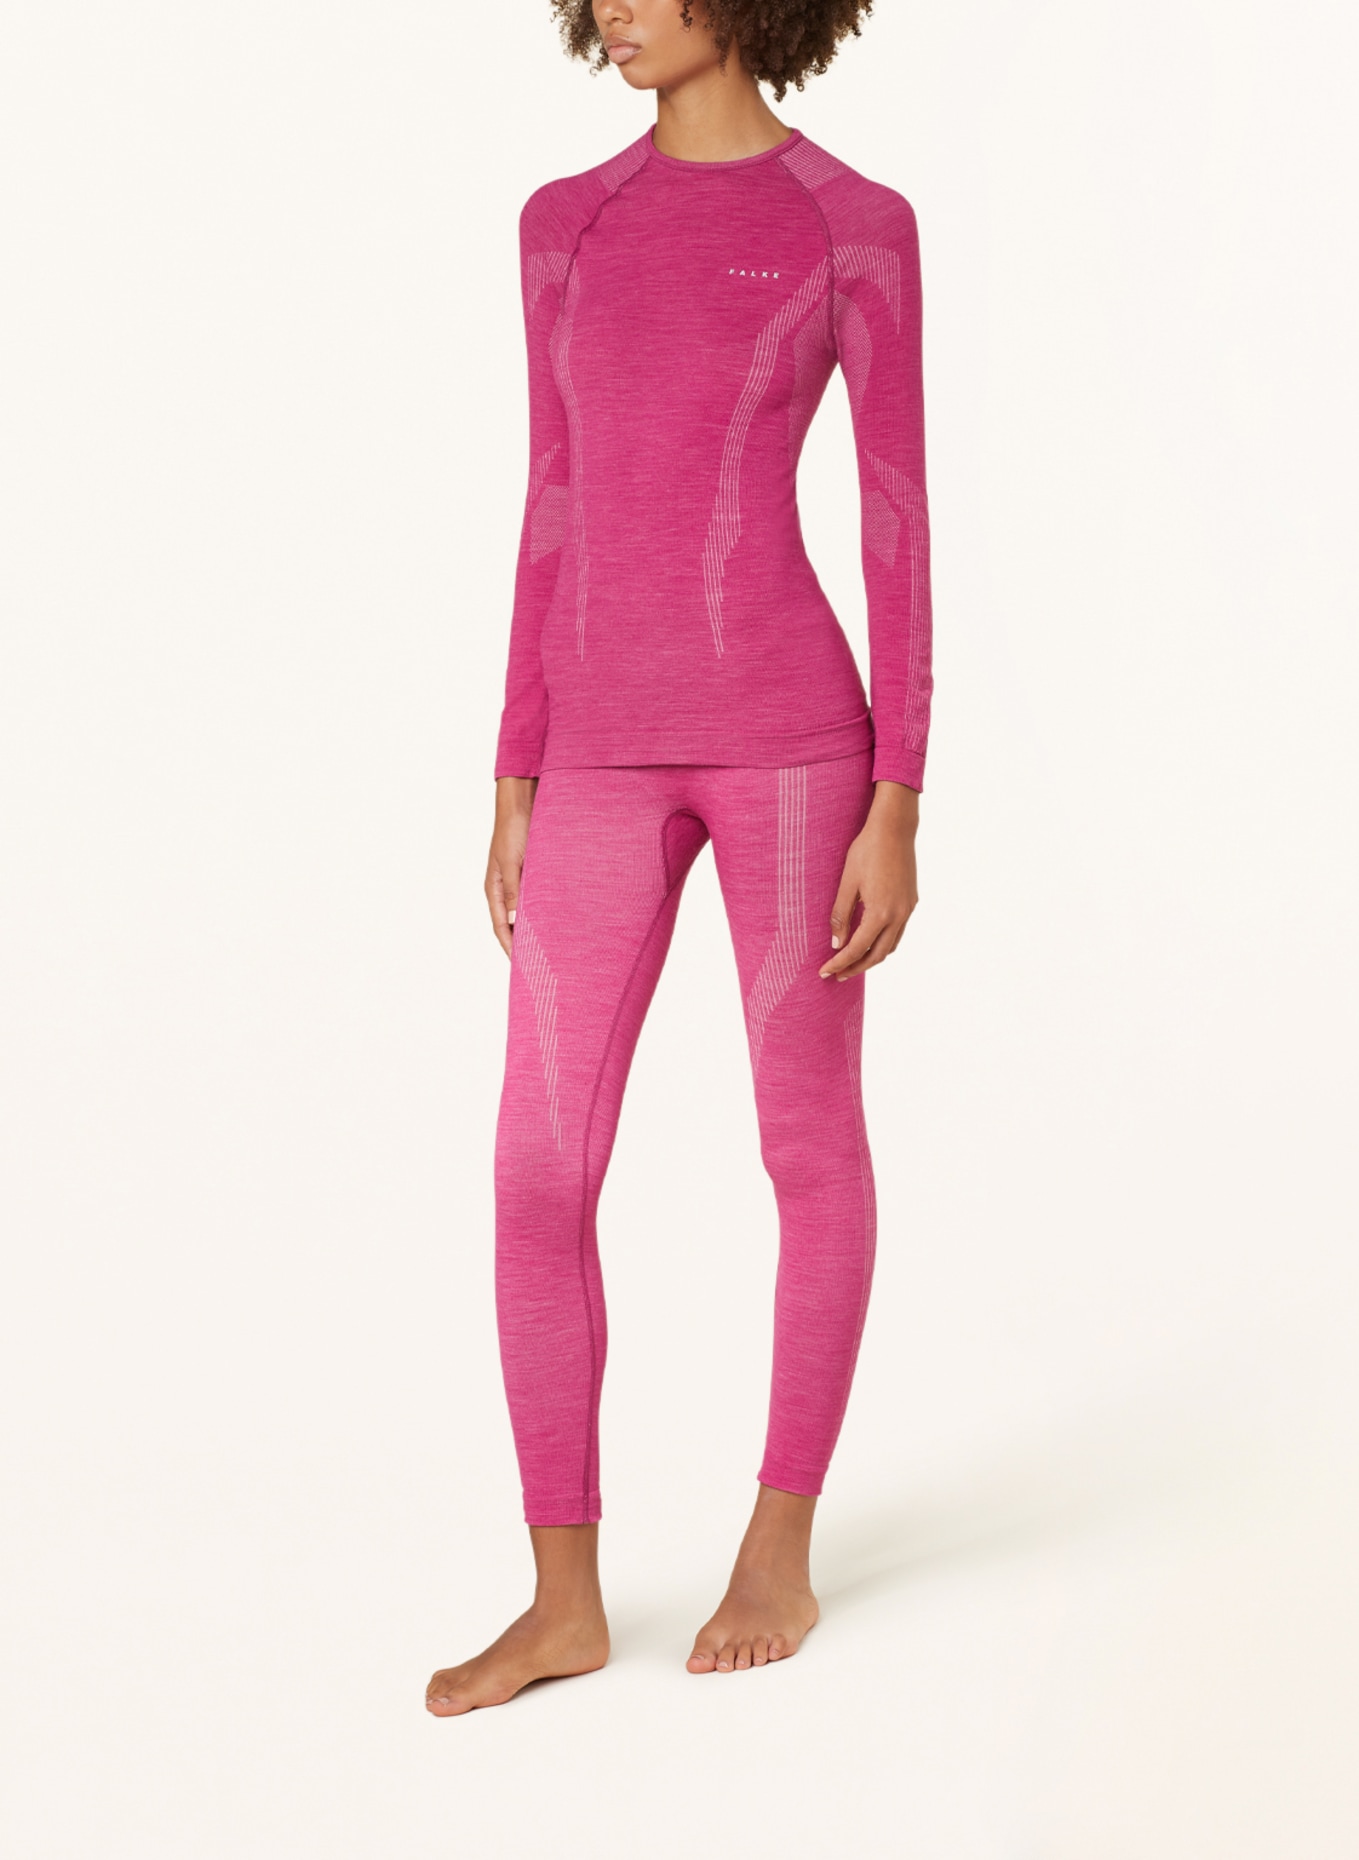 FALKE Functional base layer trousers WOOL-TECH with merino wool, Color: PINK (Image 2)